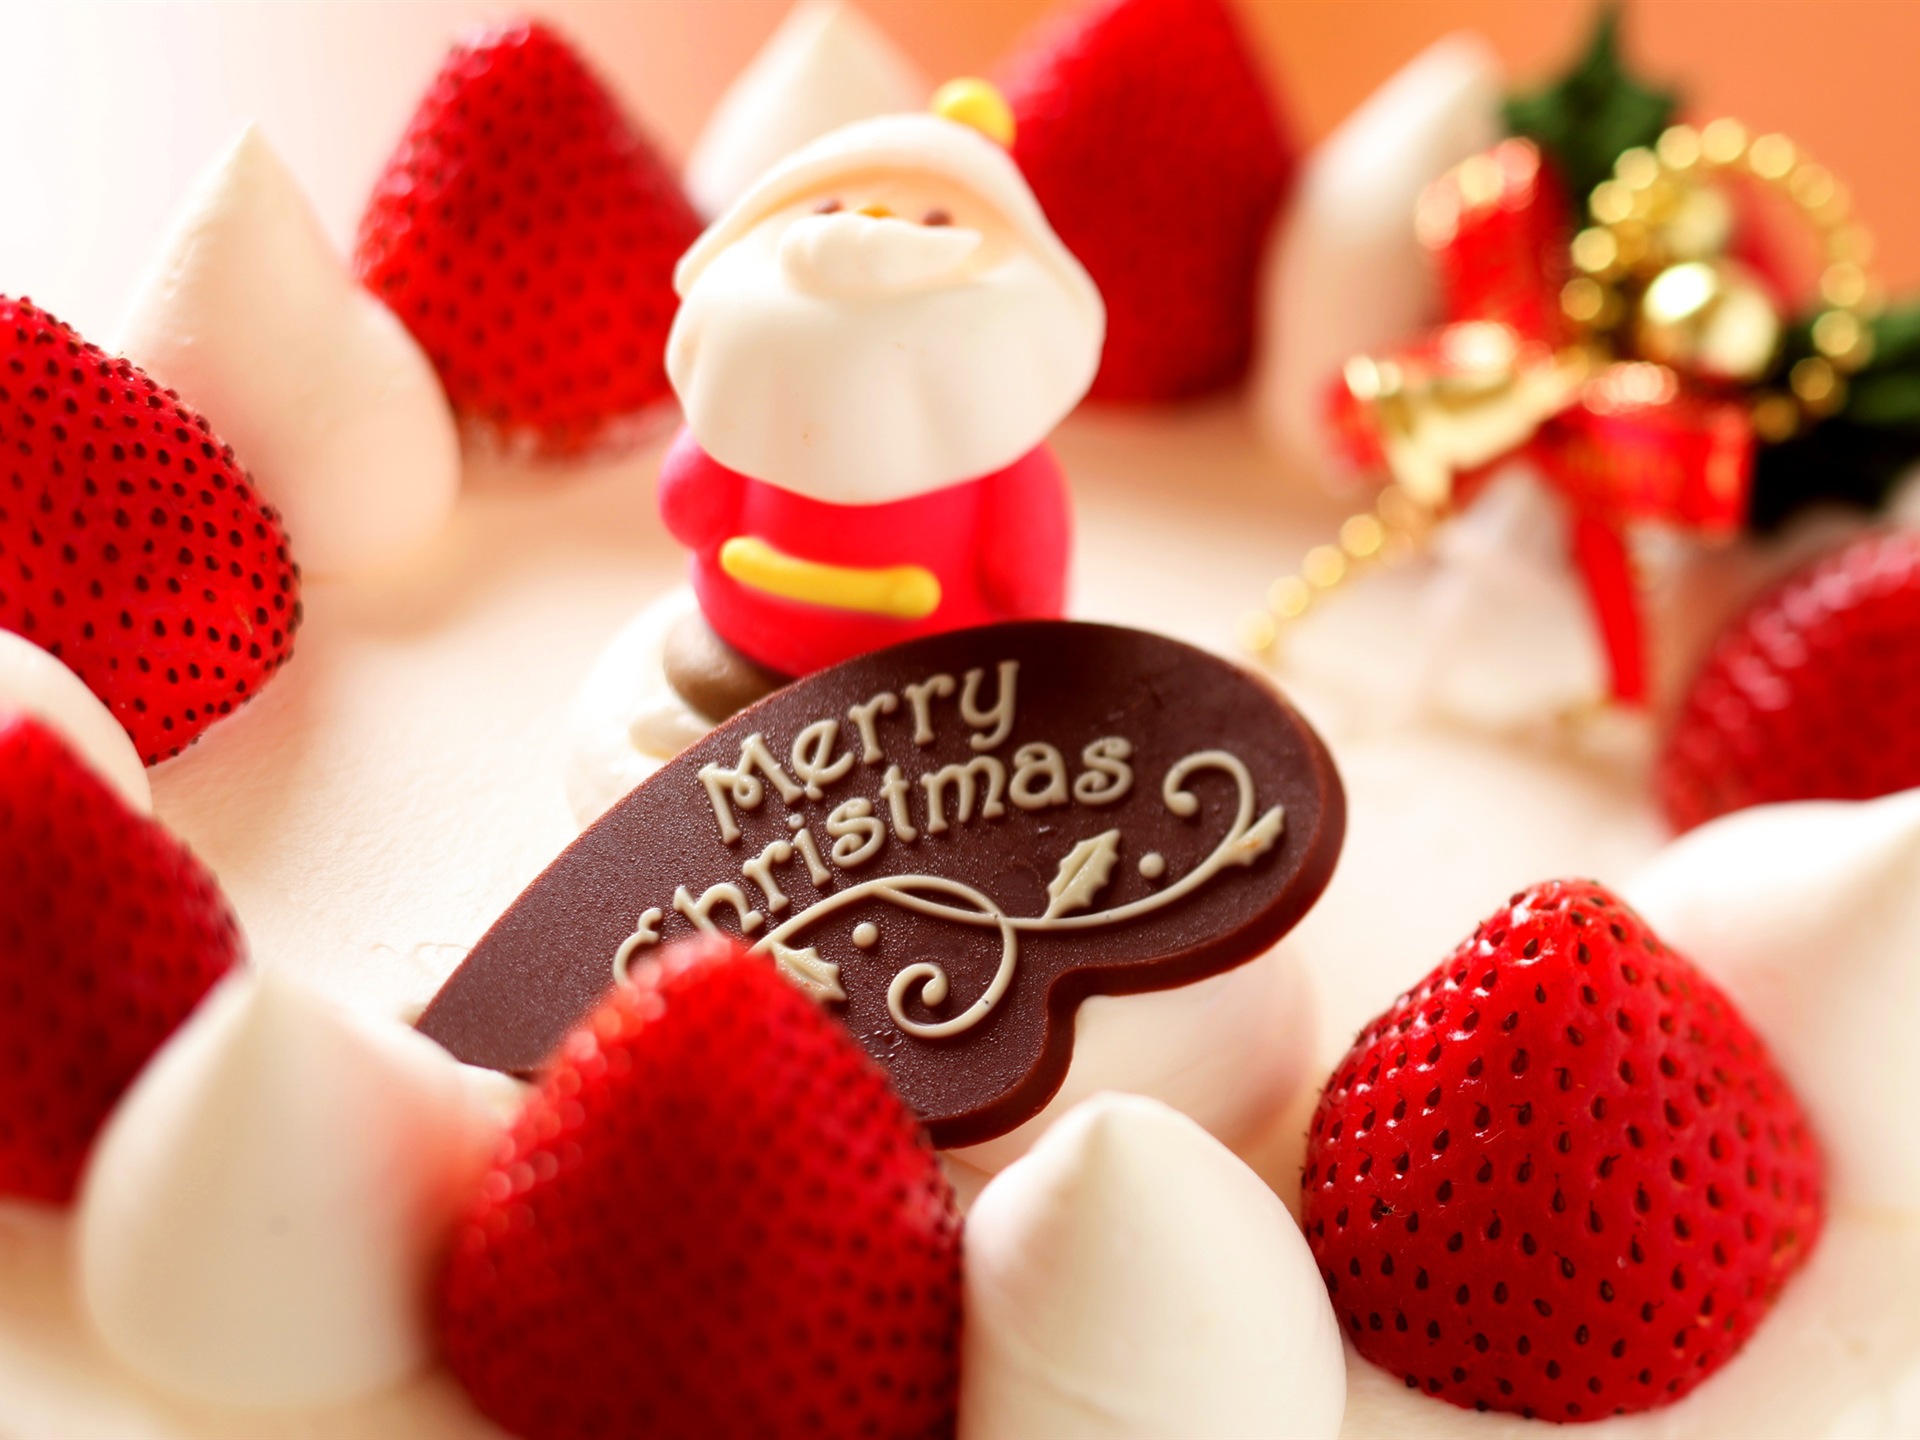 Delicious strawberry cake HD wallpapers #10 - 1920x1440